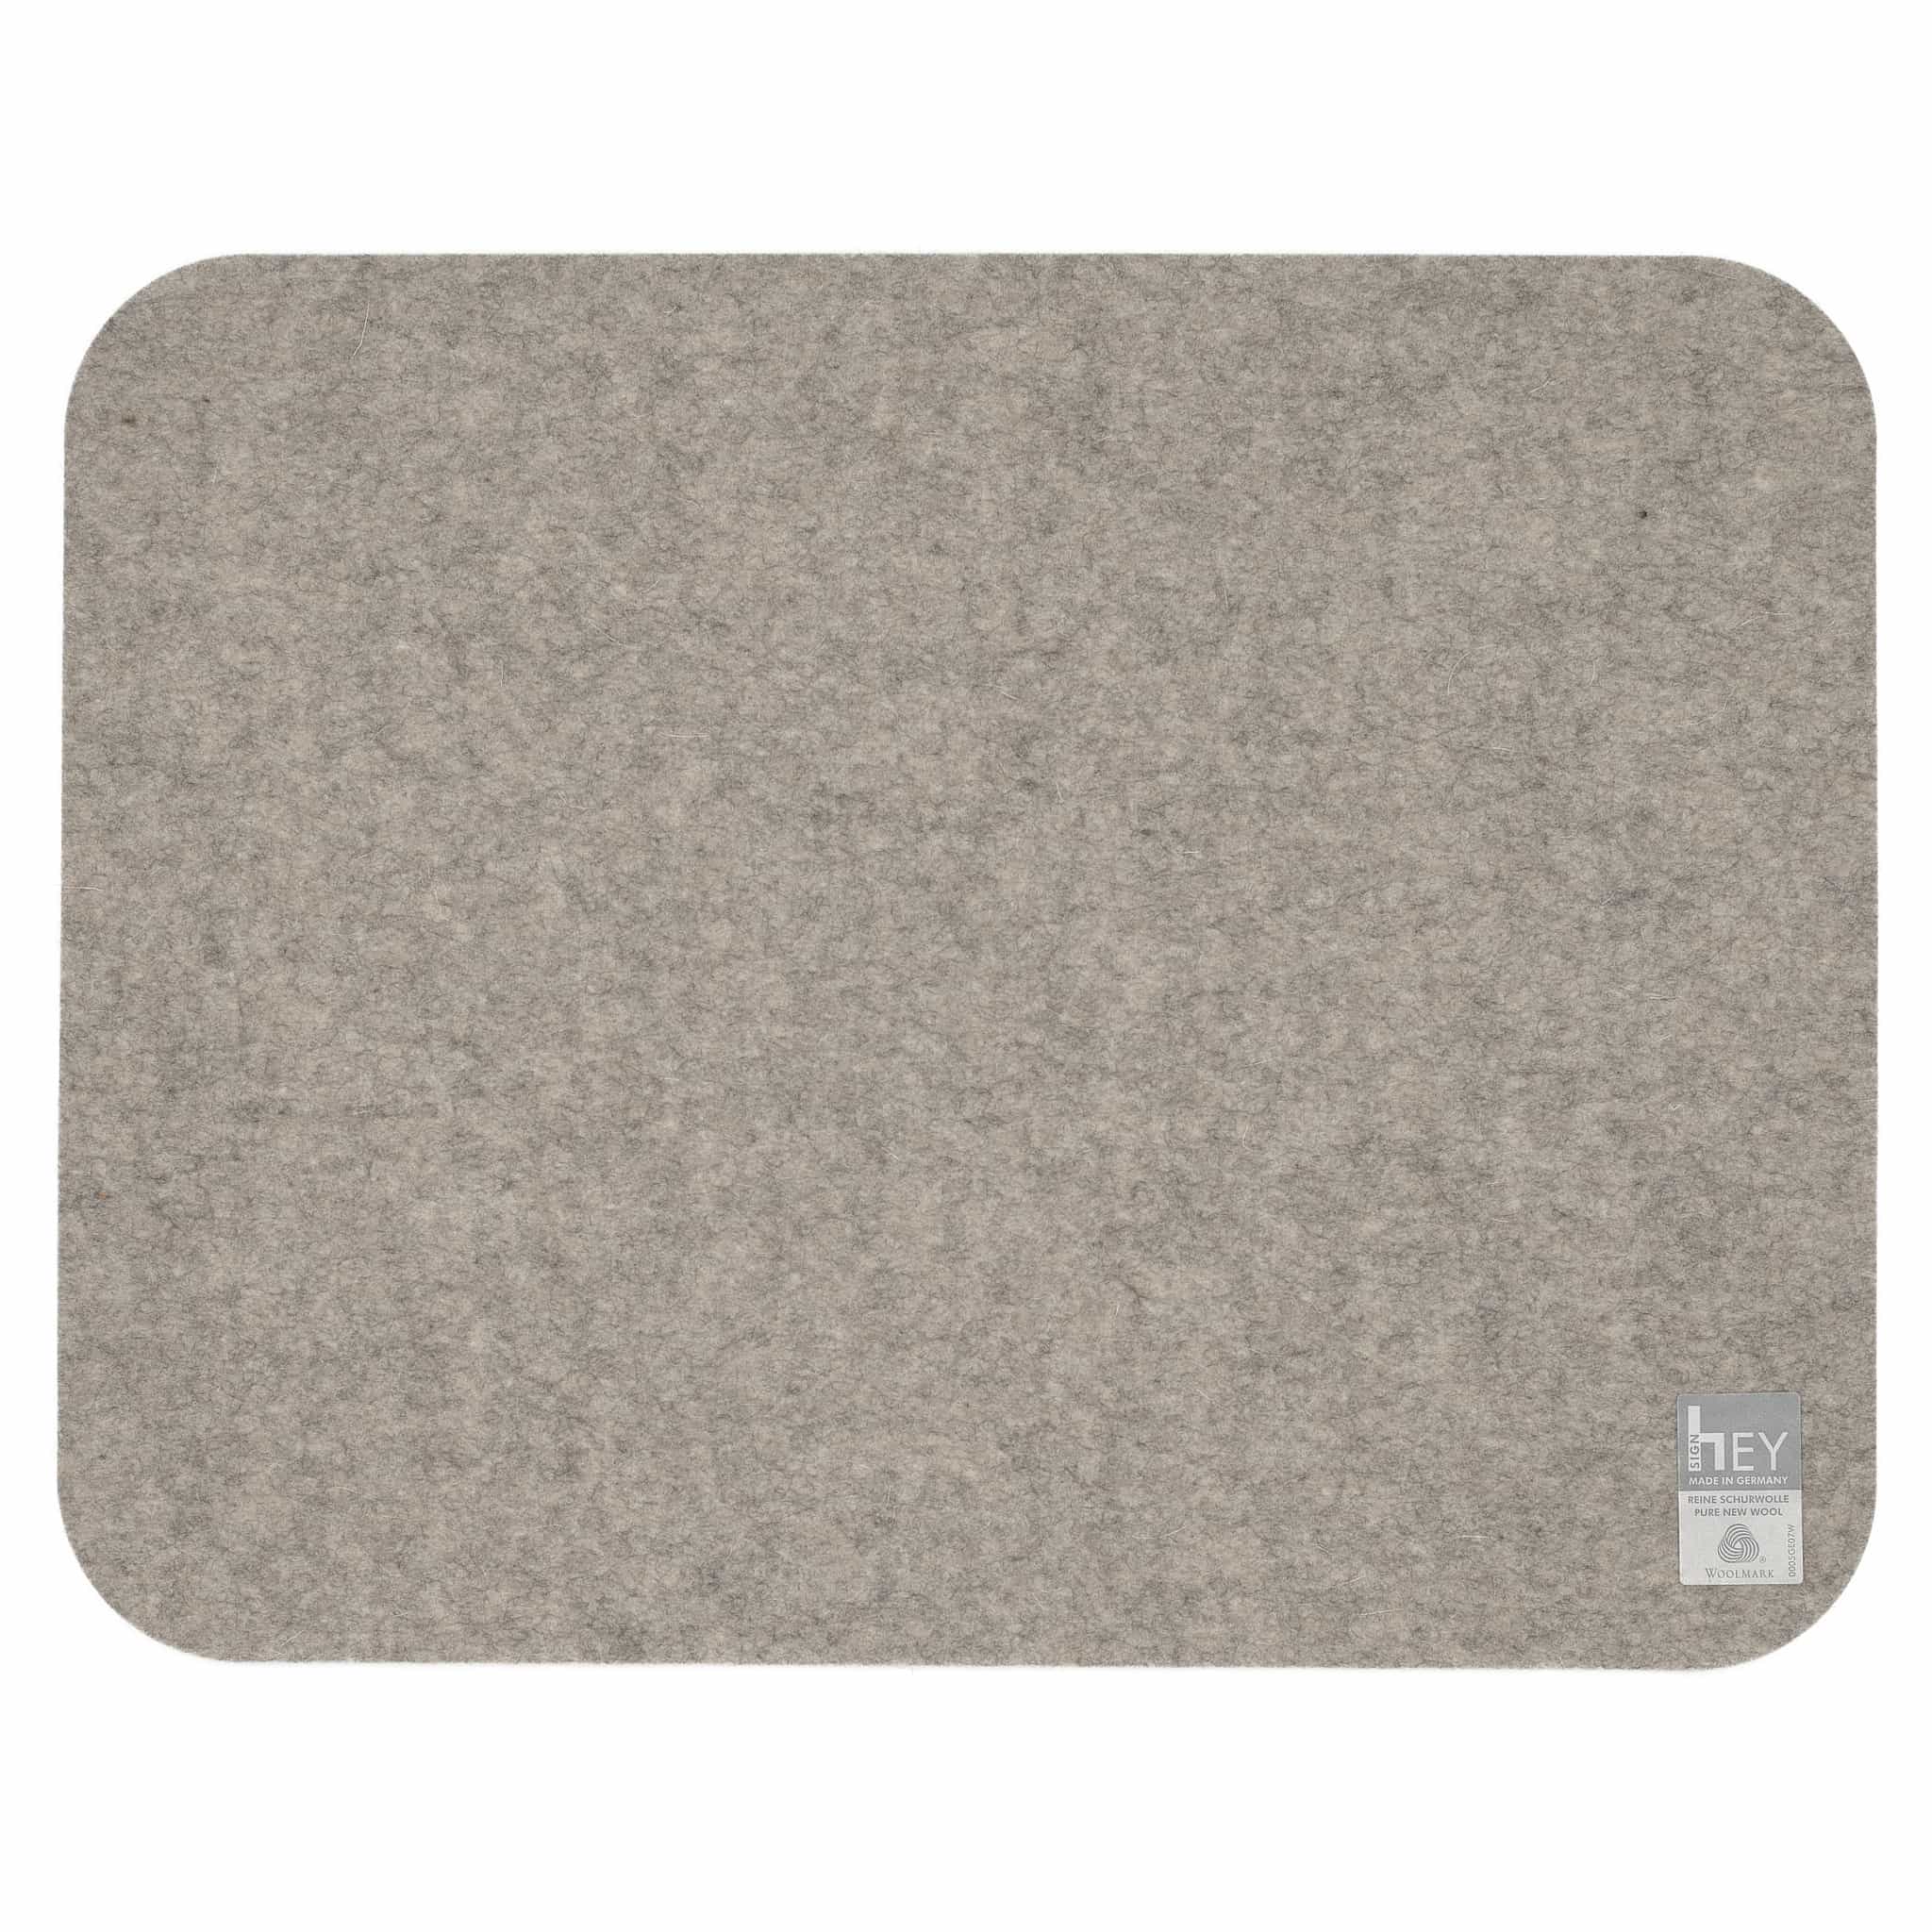 Rectangular Felt Placemat in Light-Grey by Hey-Sign 300134507 looking at Back